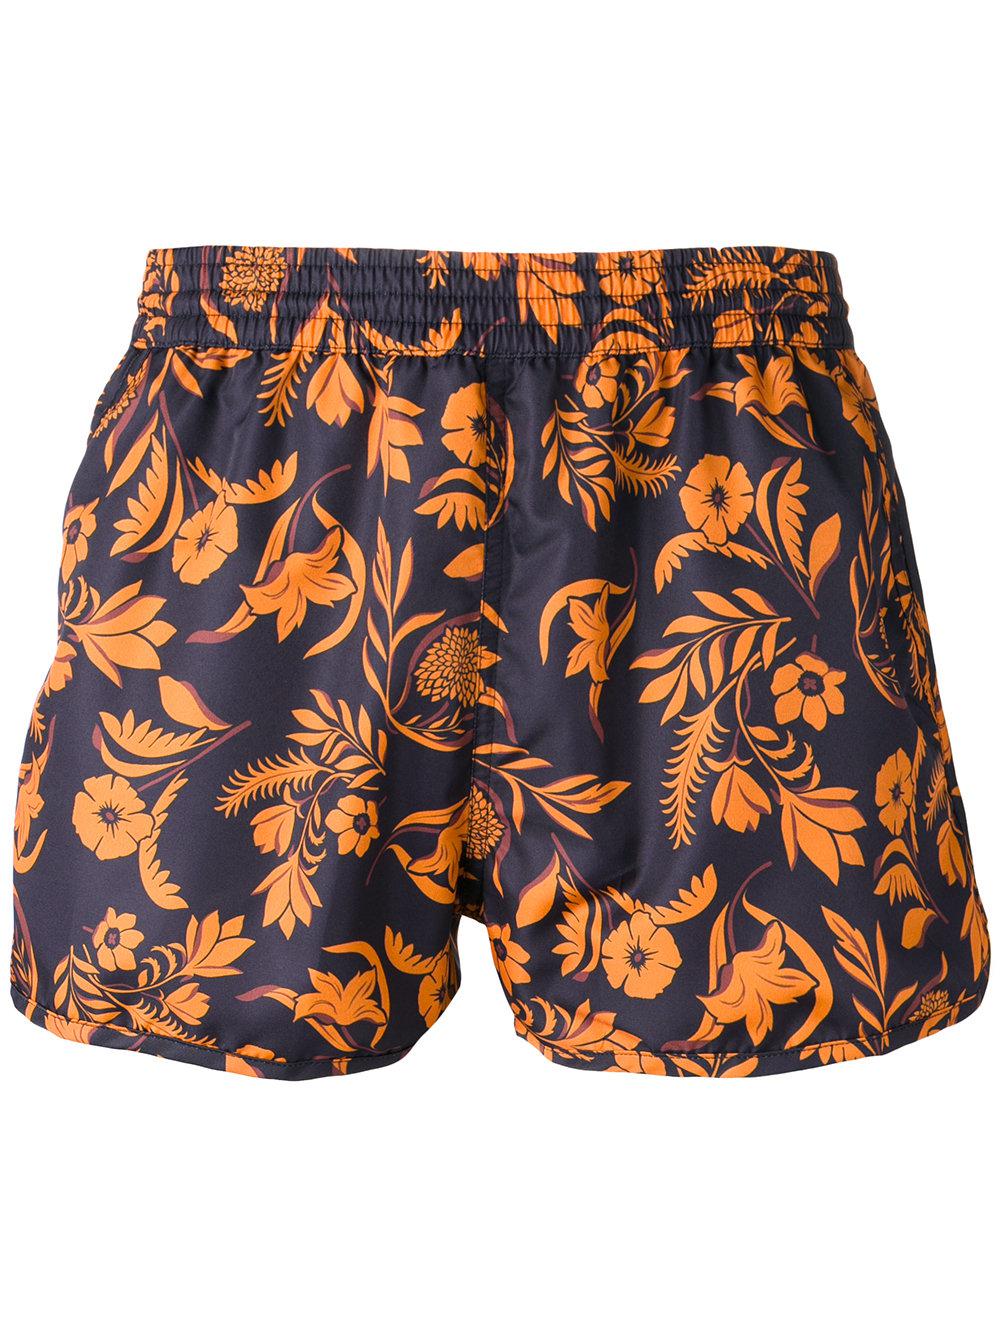 AMI Synthetic Swim Shorts in Blue for Men - Lyst